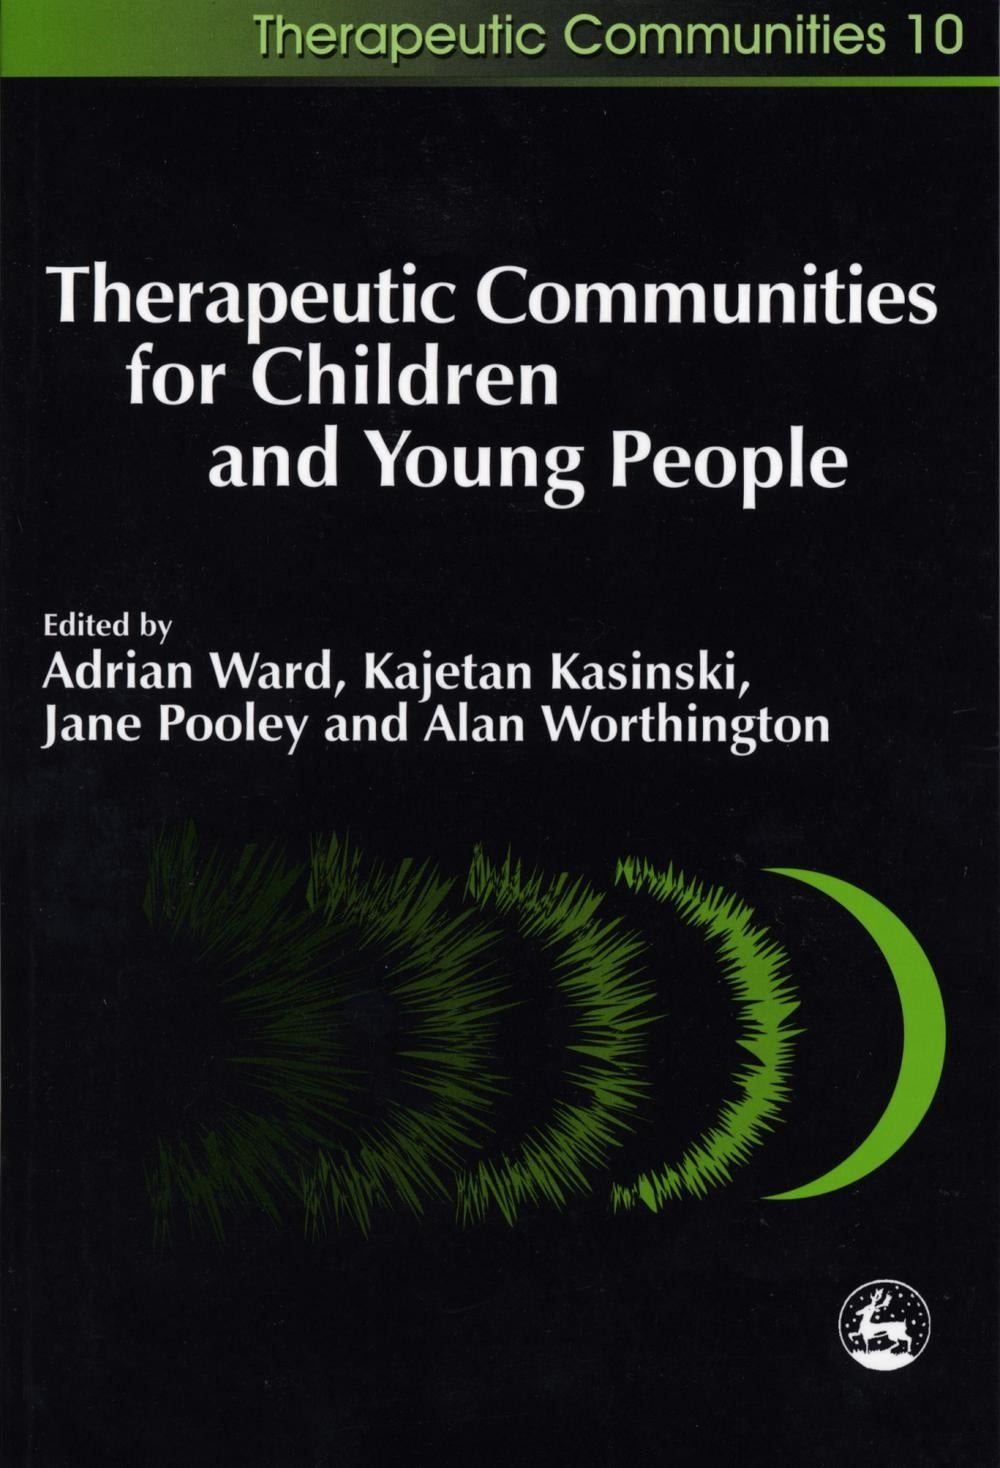 Therapeutic Communities for Children and Young People by Alan Worthington, Kajetan Kasinski, Adrian Ward, Jane Pooley, No Author Listed